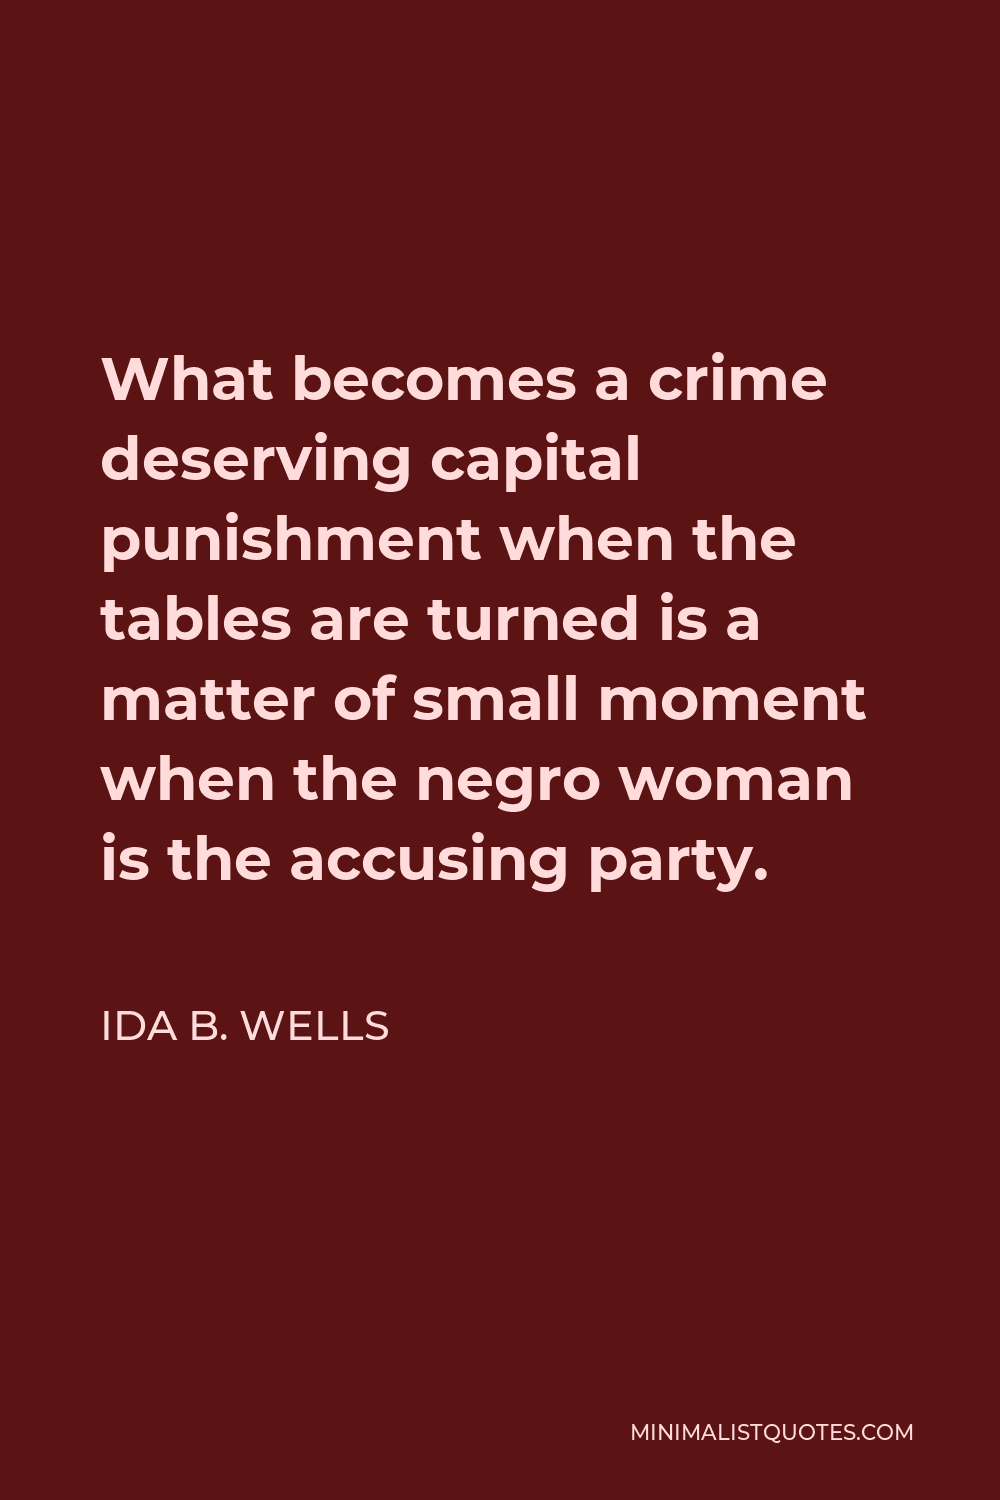 Ida B. Wells Quote - What becomes a crime deserving capital punishment when the tables are turned is a matter of small moment when the negro woman is the accusing party.